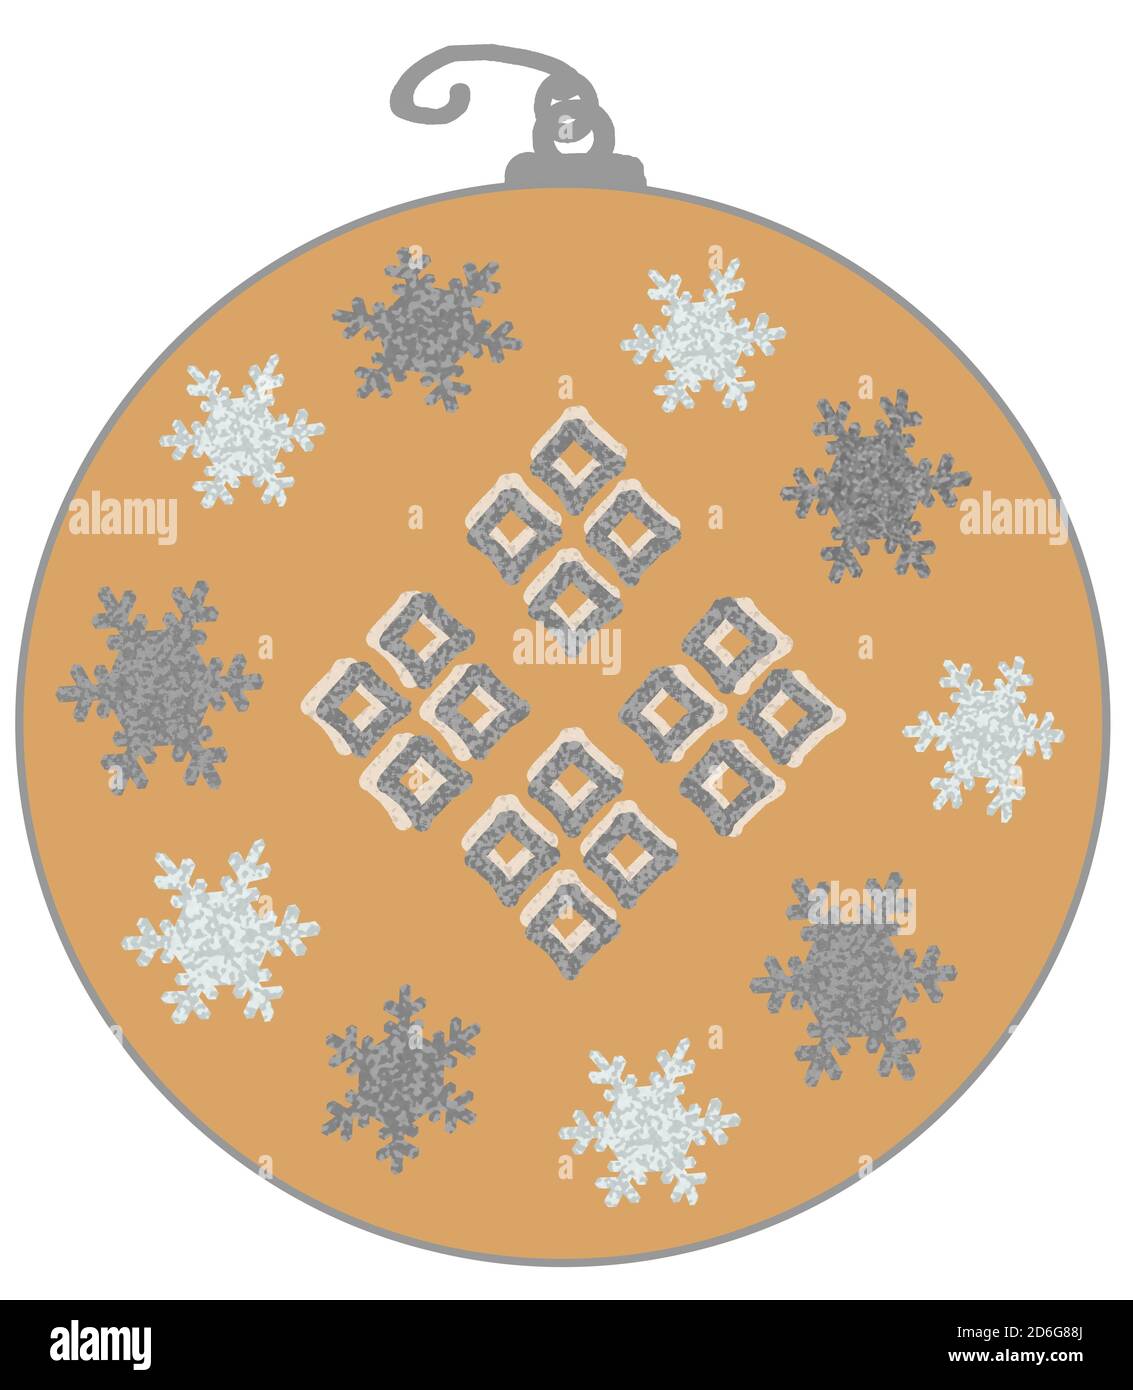 Silver and gold Christmas bauble round decoration hand drawn style with snowflakes illustration graphic resource. Stock Photo